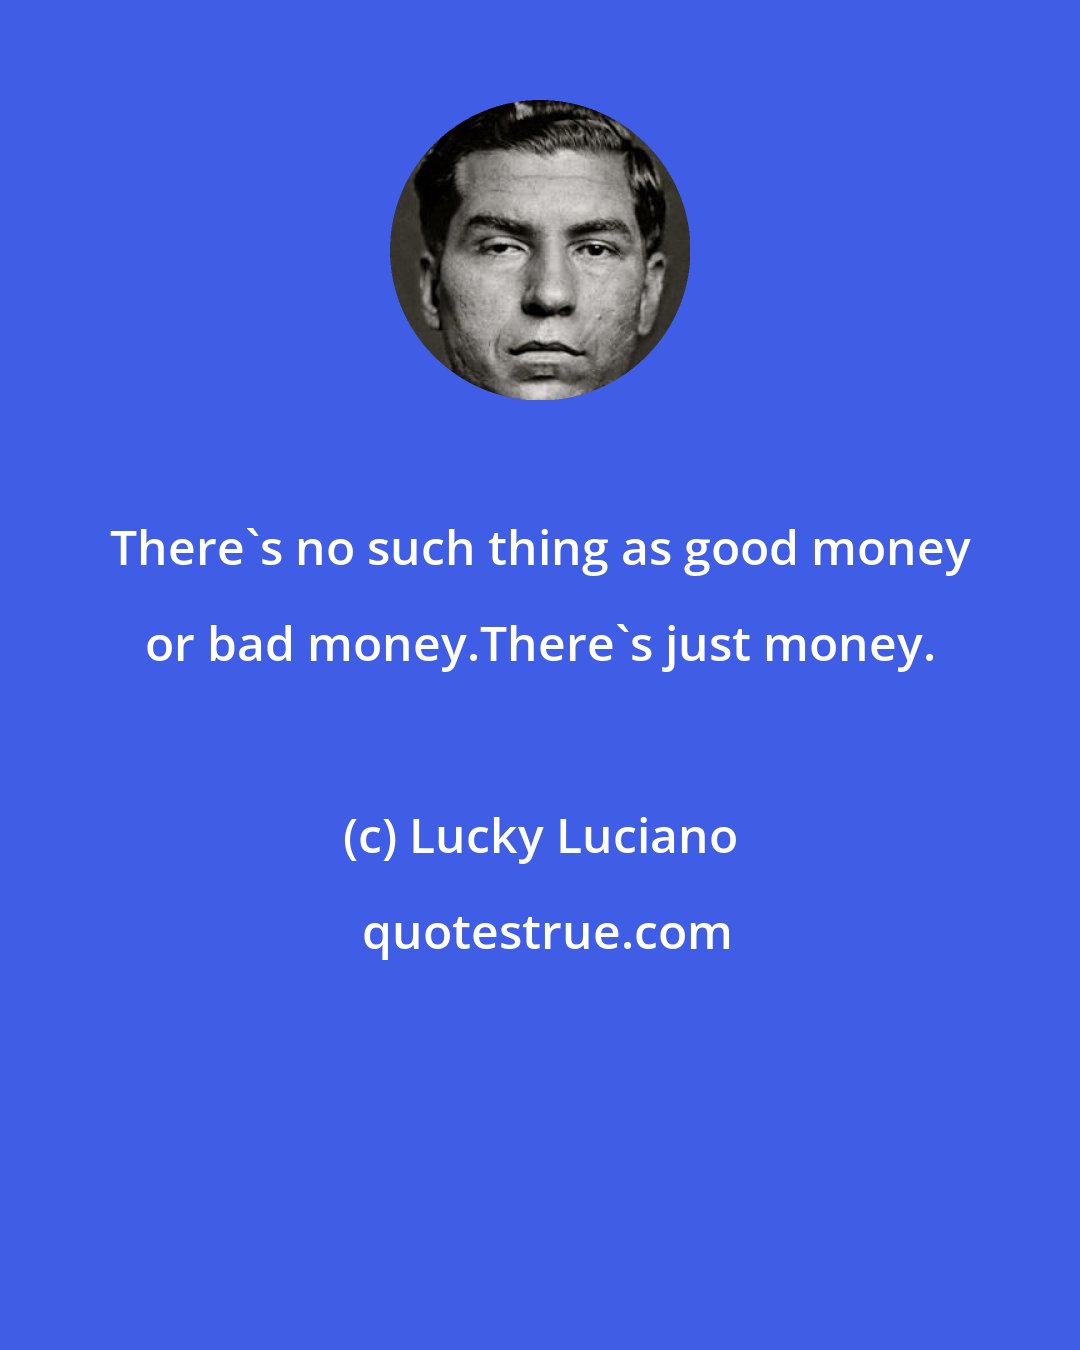 Lucky Luciano: There's no such thing as good money or bad money.There's just money.